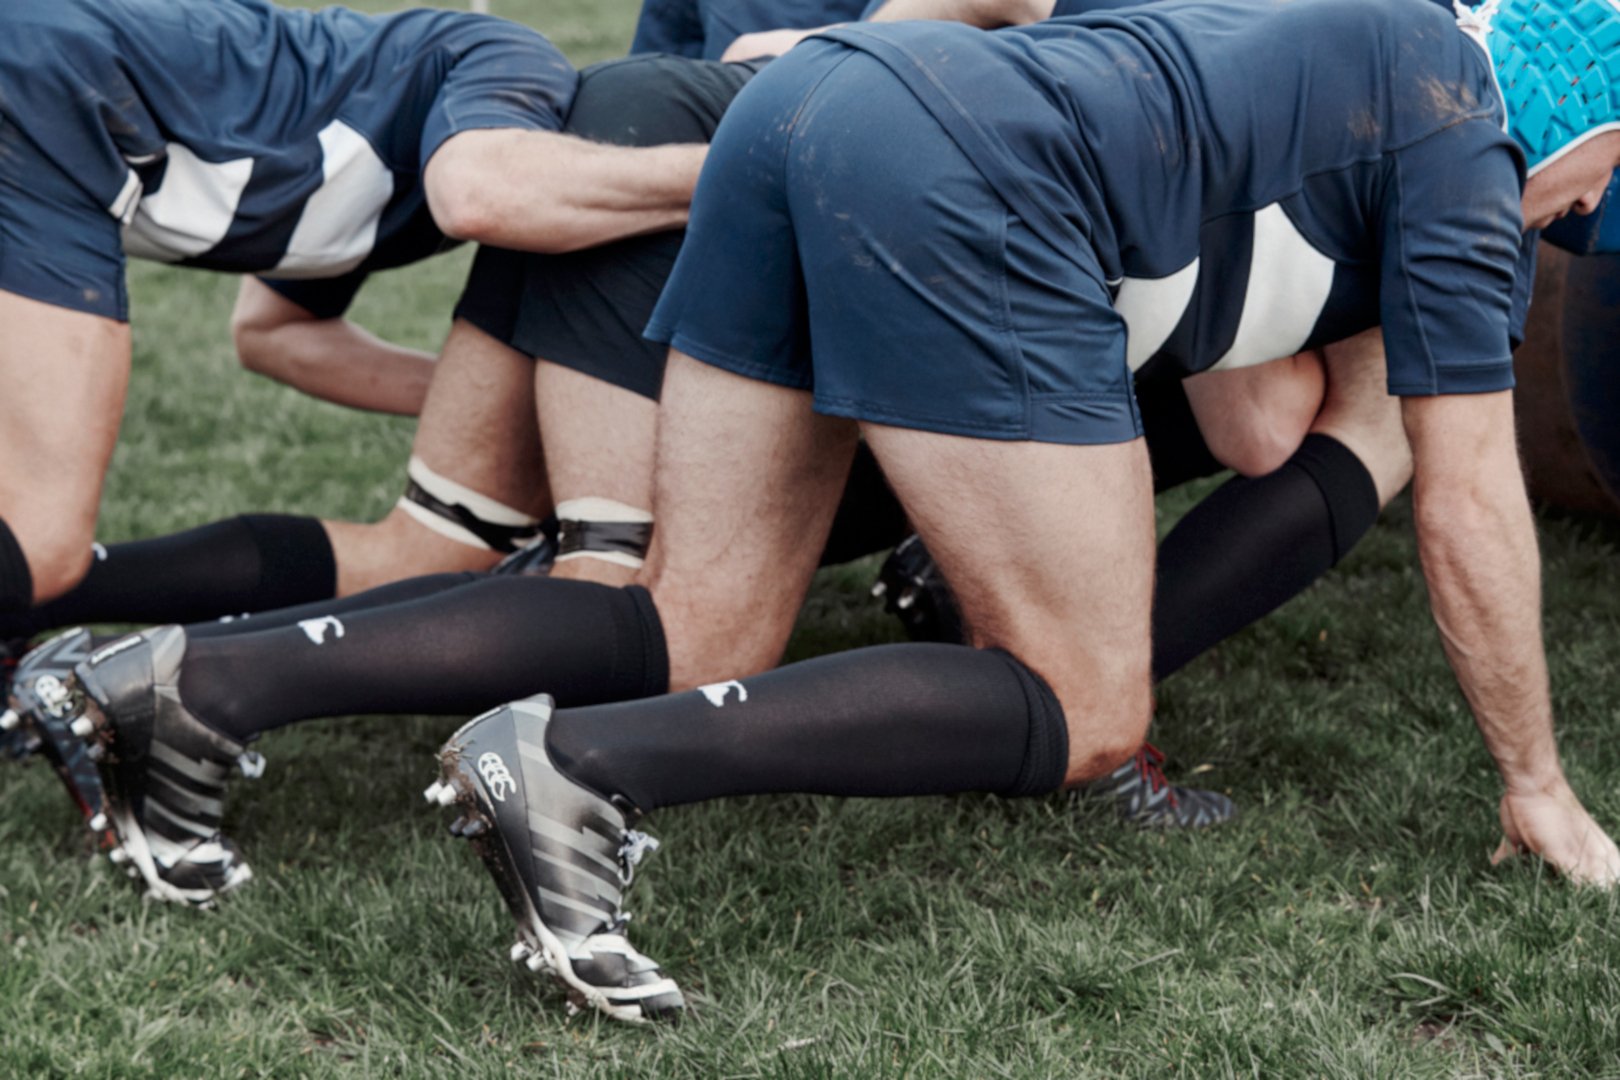 View of legs in a scrum